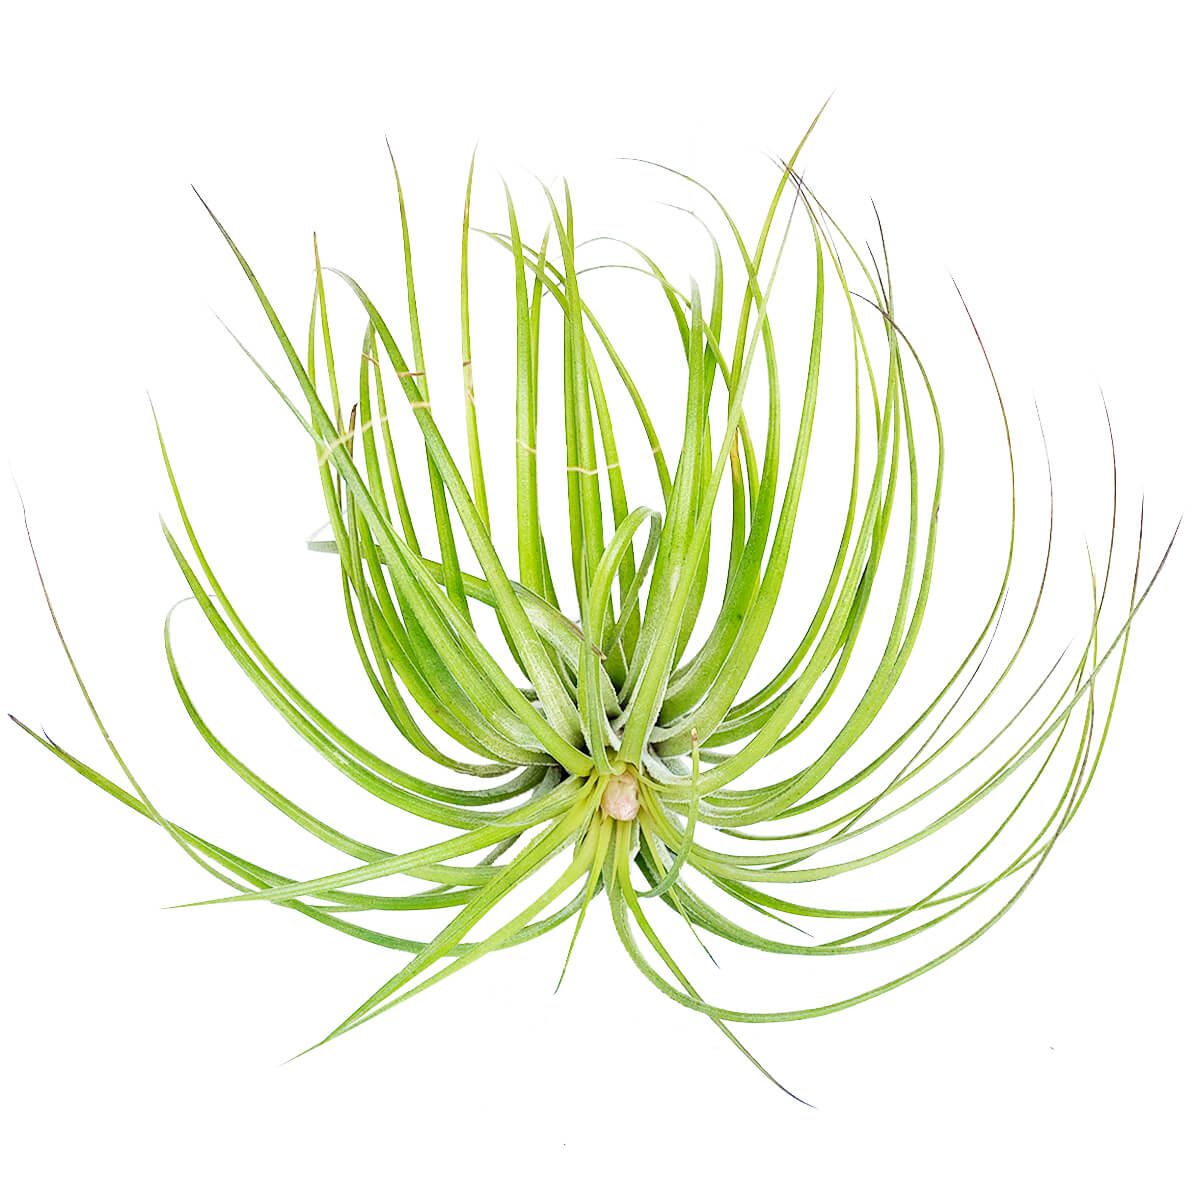 How to grow and care for Tillandsia Stricta air plants in terrariums